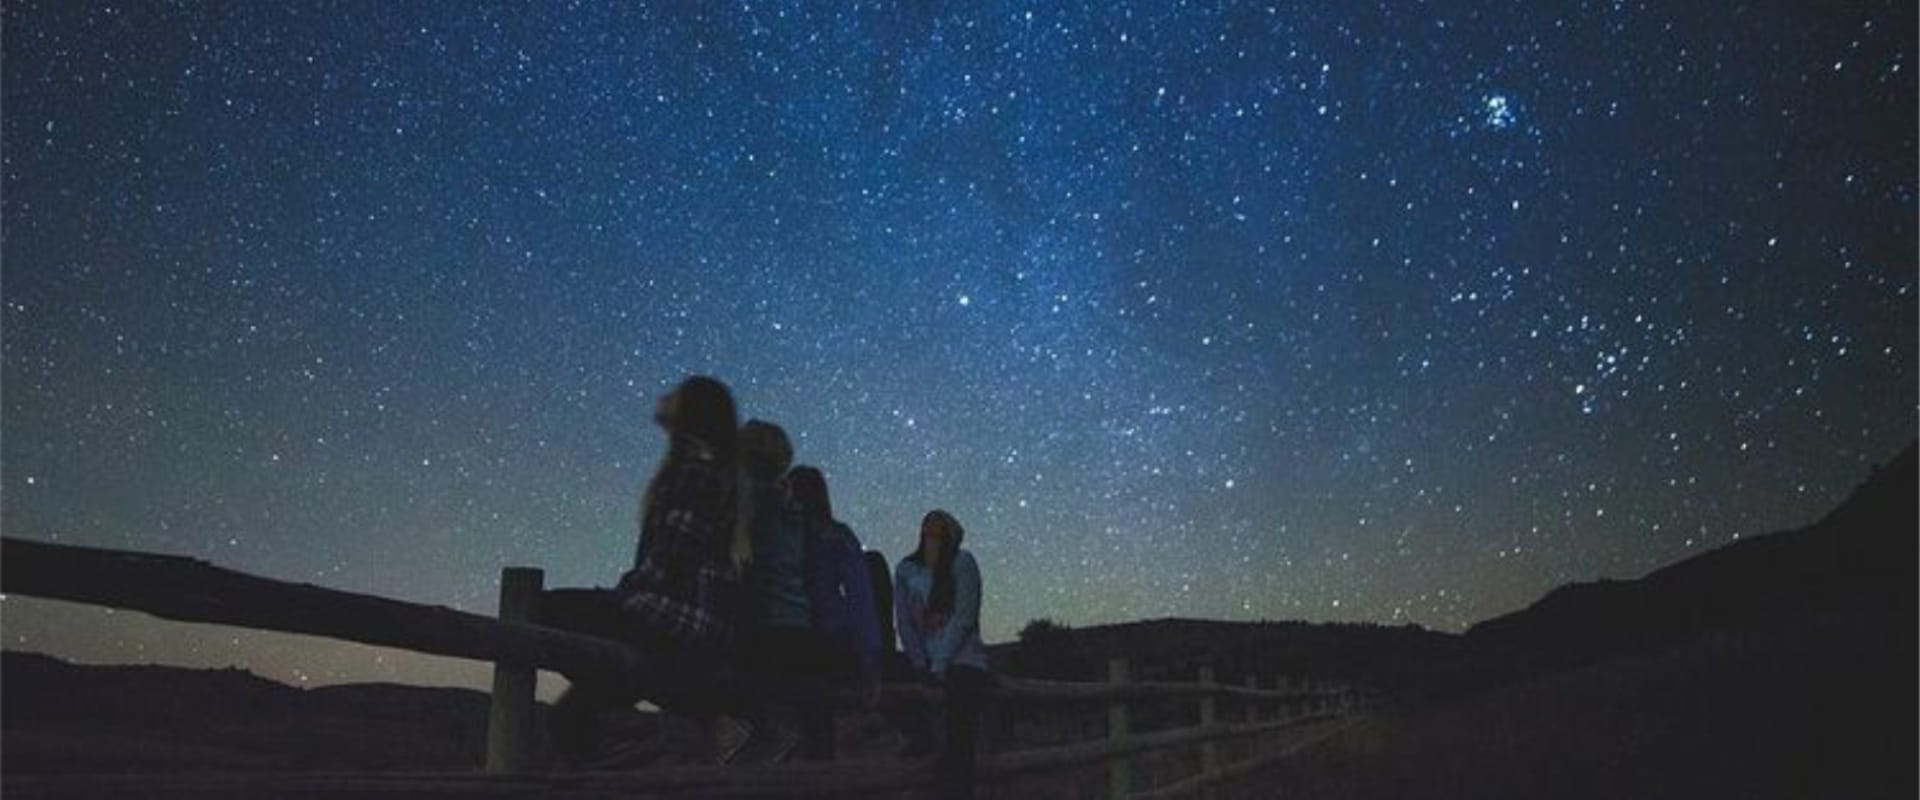 Lose yourselves on a guided star gazing excursion